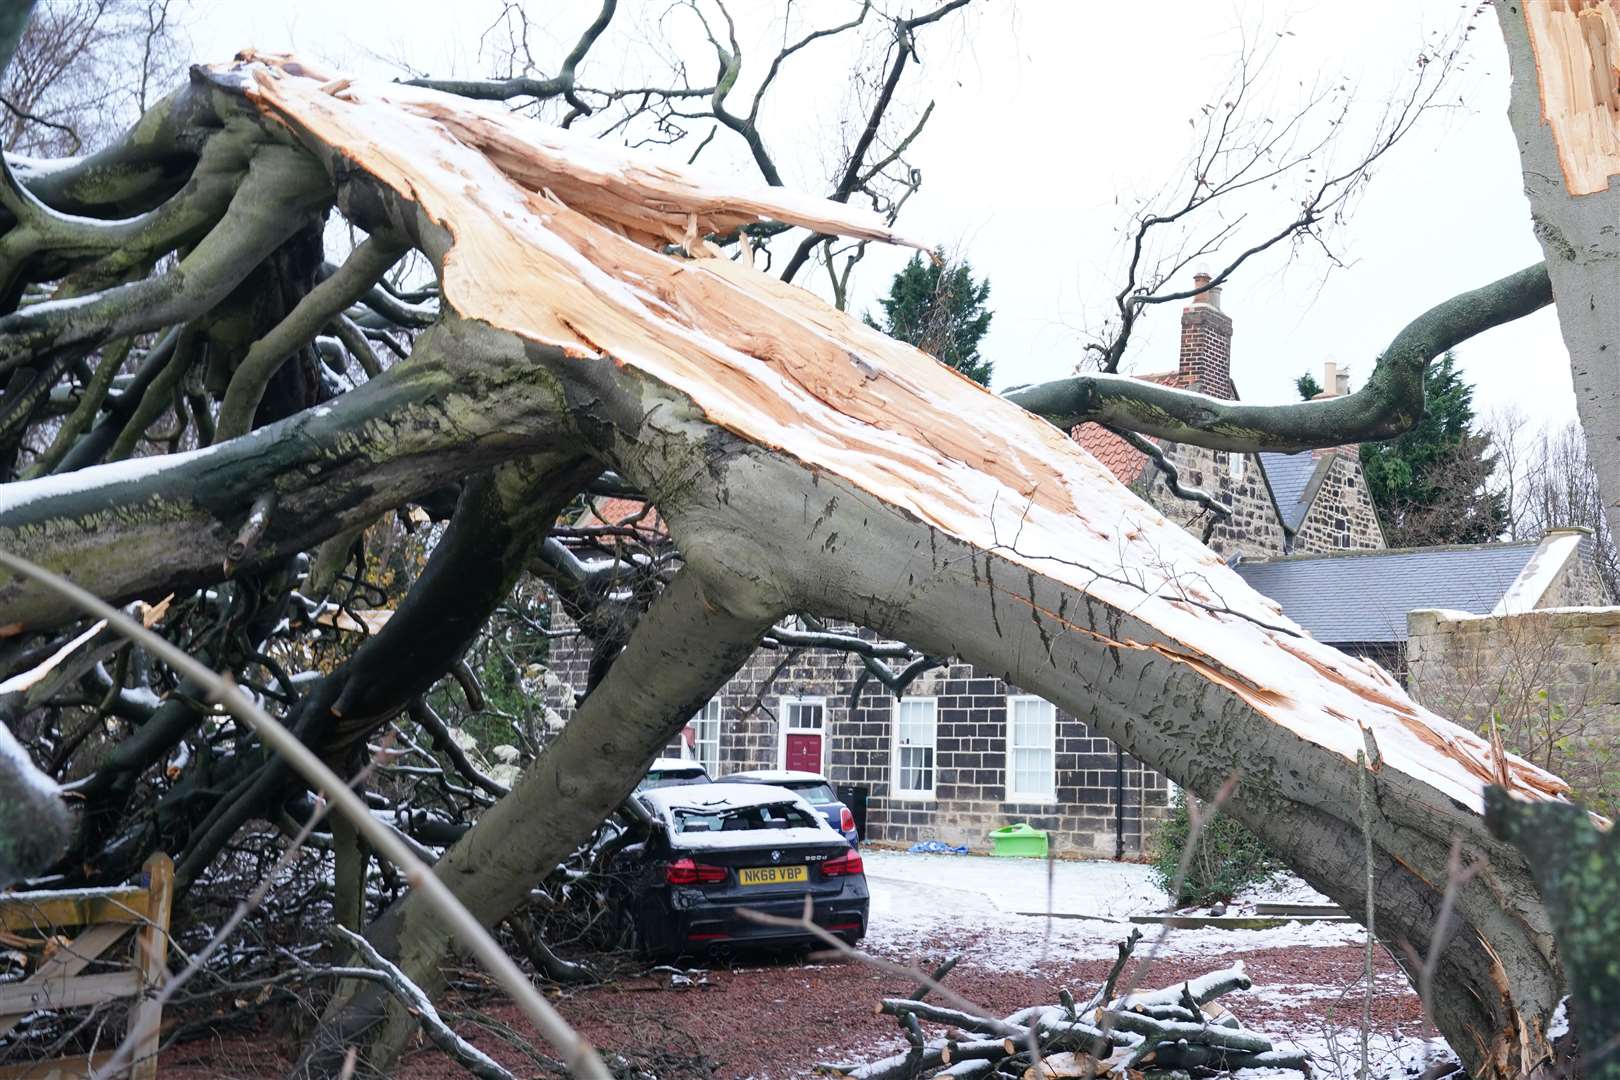 A fallen tree in North Tyneside in the aftermath of Storm Arwen in November 2021 (Owen Humphreys/PA)